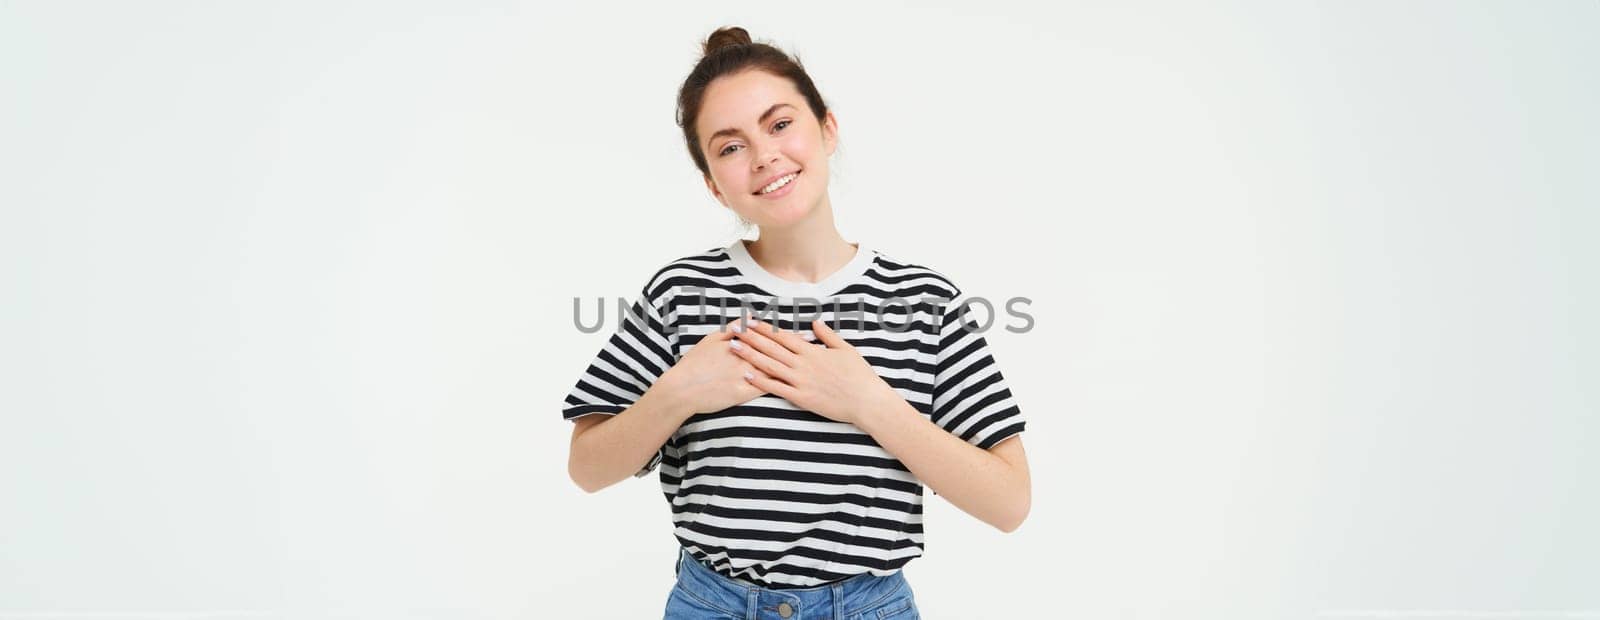 Portrait of smiling modern woman, holding hands on heart, says thank you, expresses her warm feelings, white background.